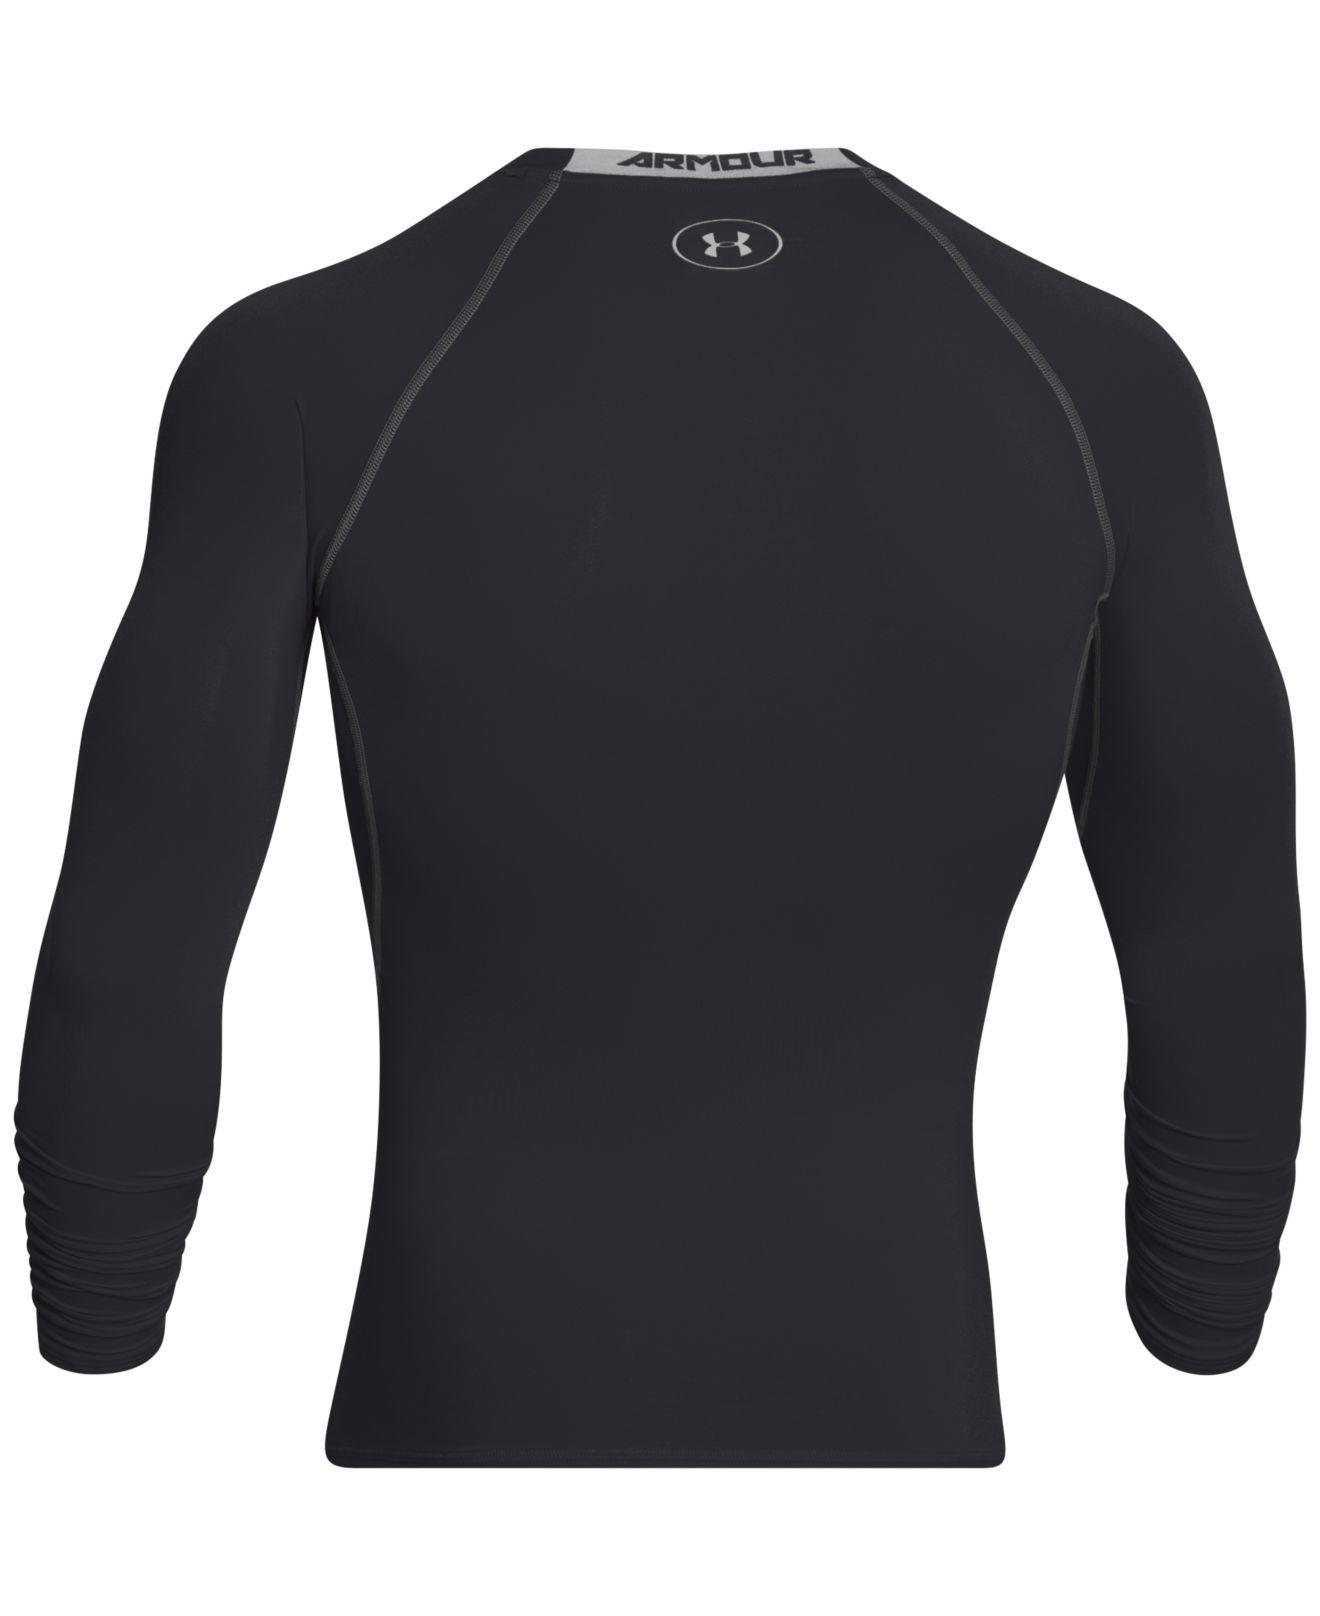 Under Armour Heatgear Coolswitch Compression Longsleeve Shirt Royal 1275057-400 